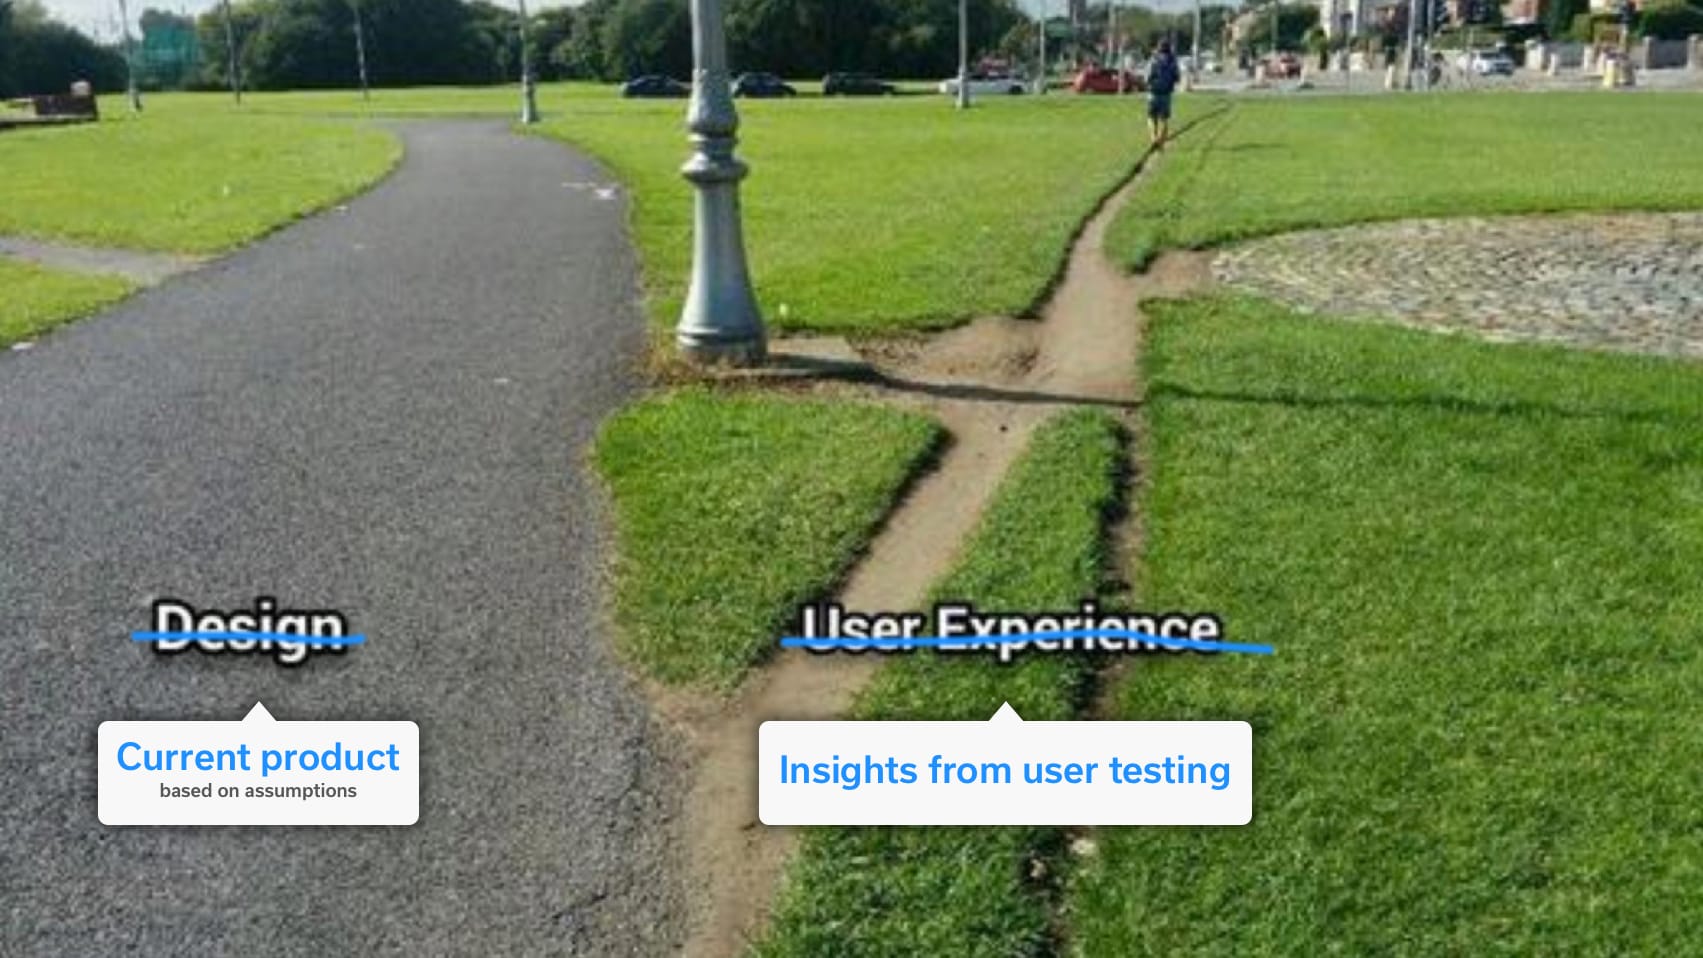 This is a well-known meme that sums up how dispensable design can become without user testing. We updated it according to our understanding. Source: @vinniequinn, twitter